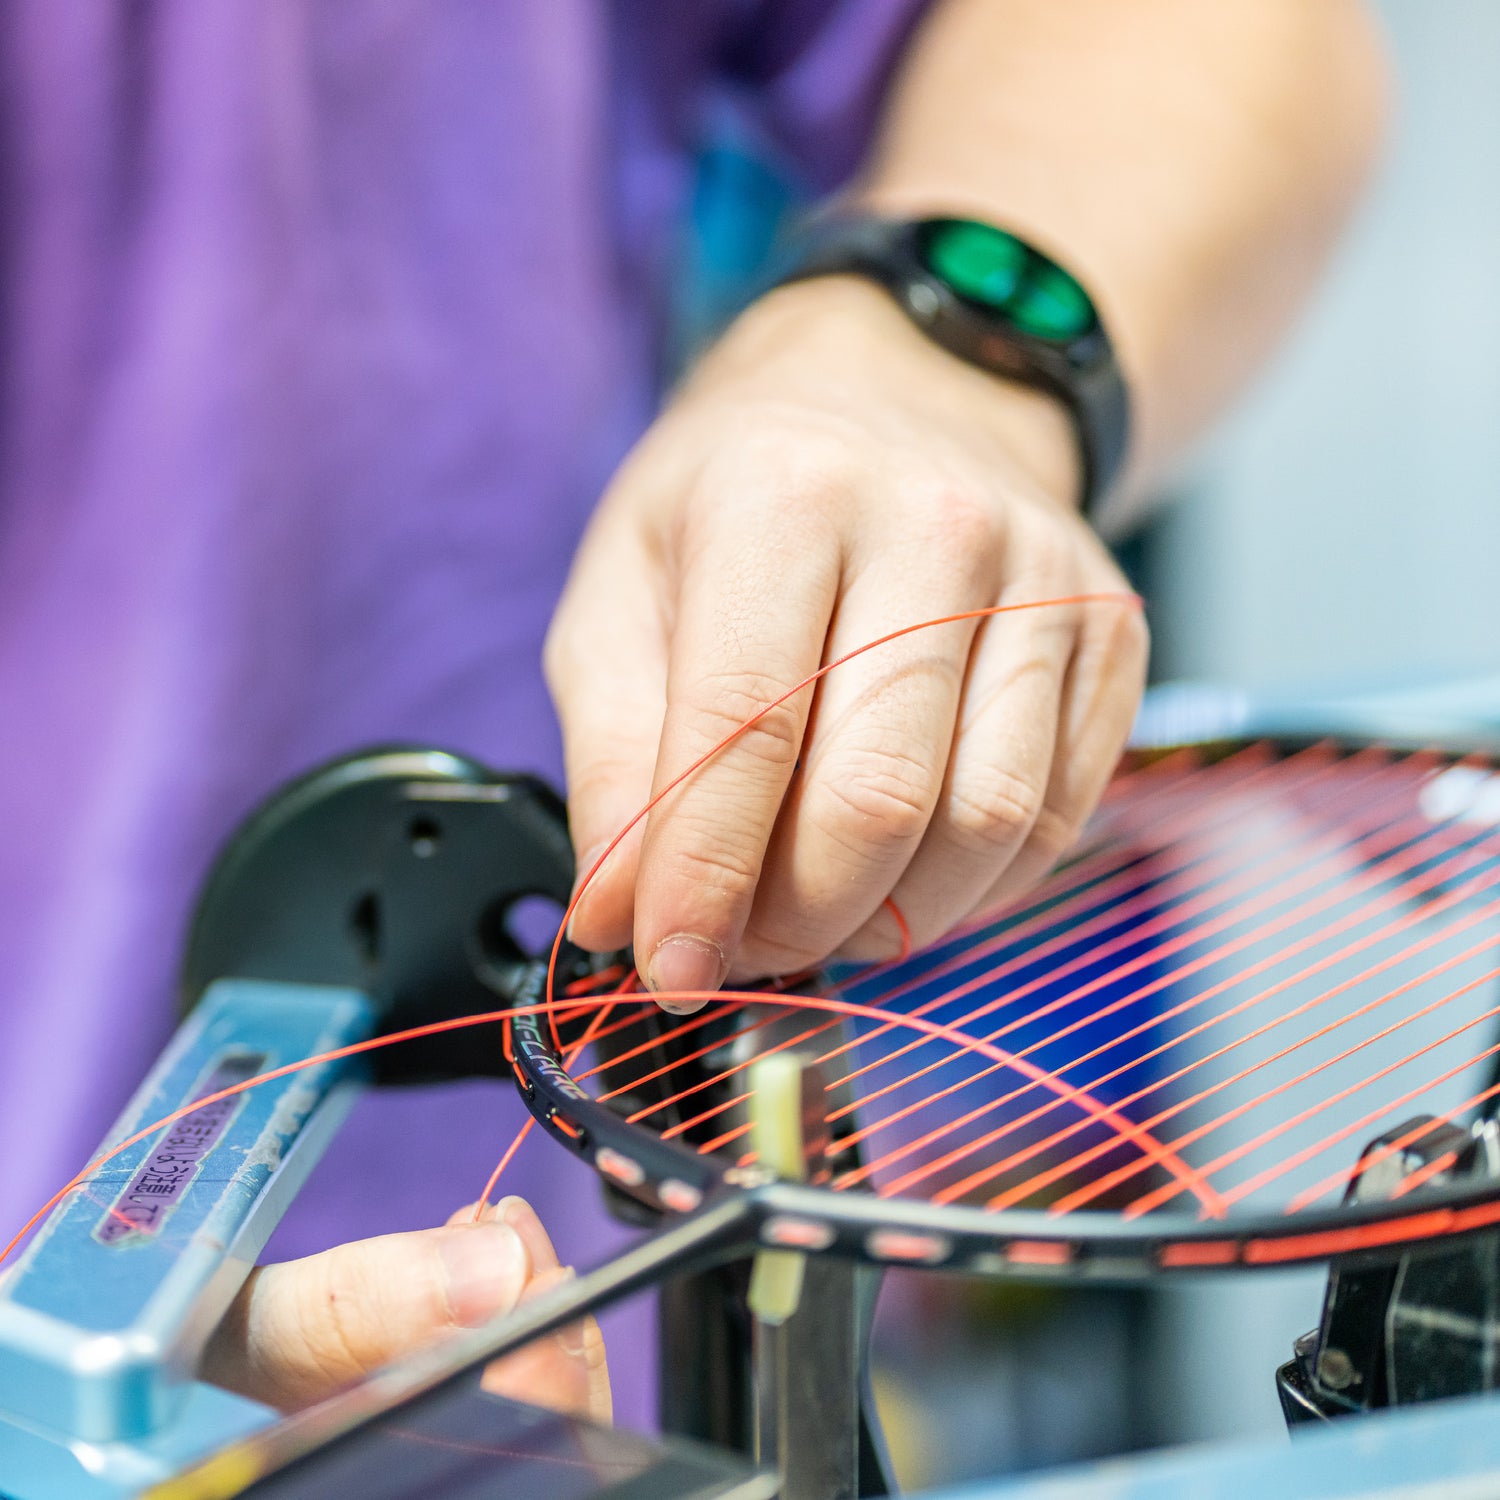 Badminton strings and tension: what should I choose?